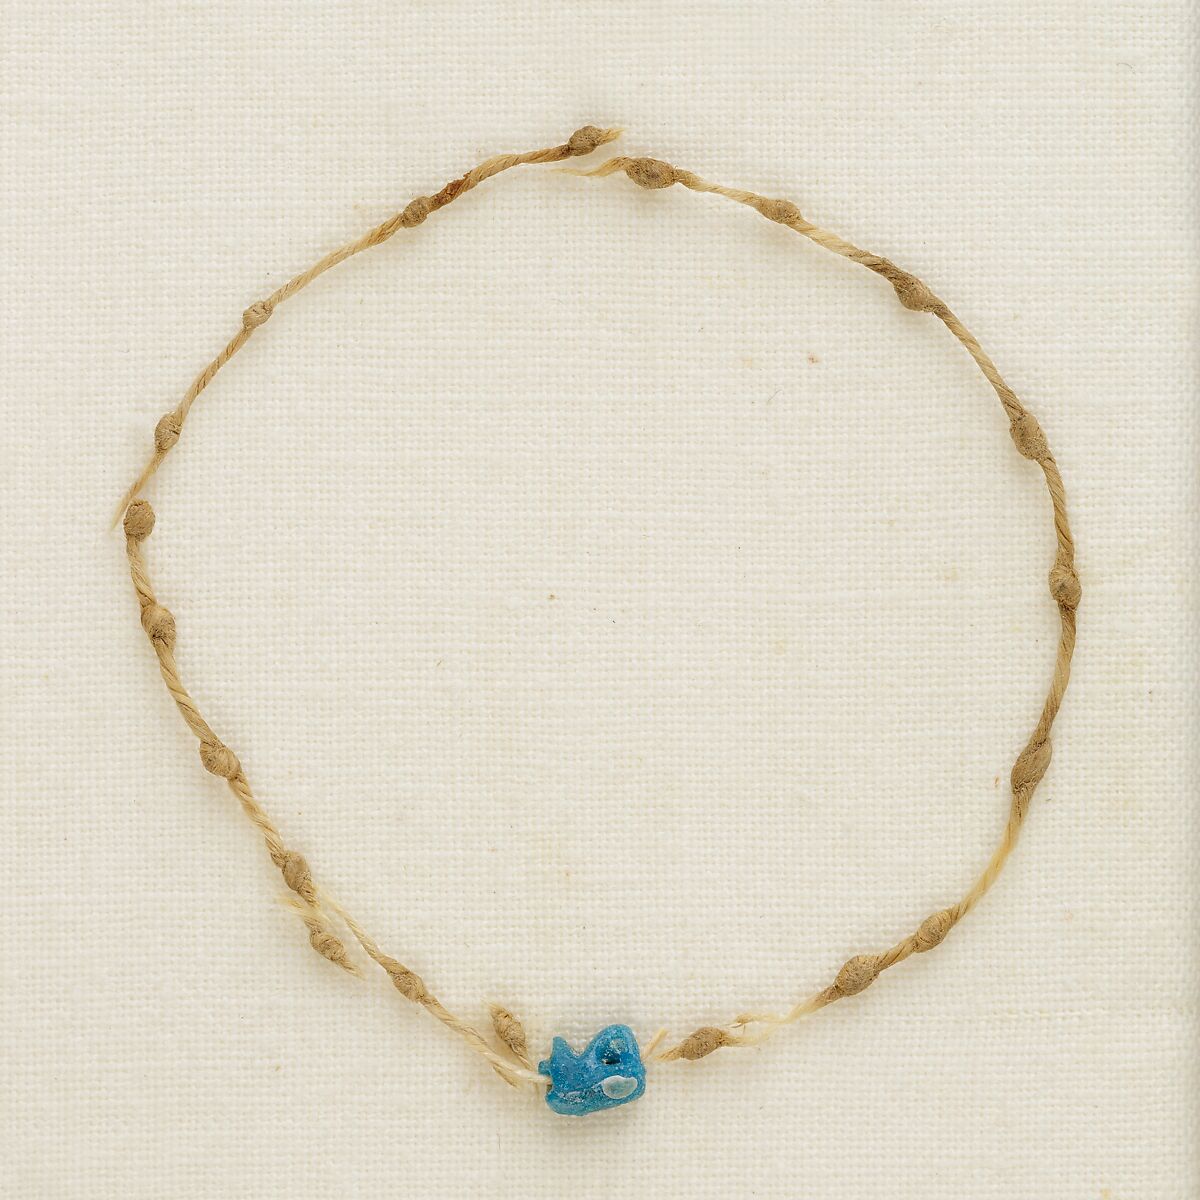 Bracelet with knots and wedjat eye, Linen, faience 